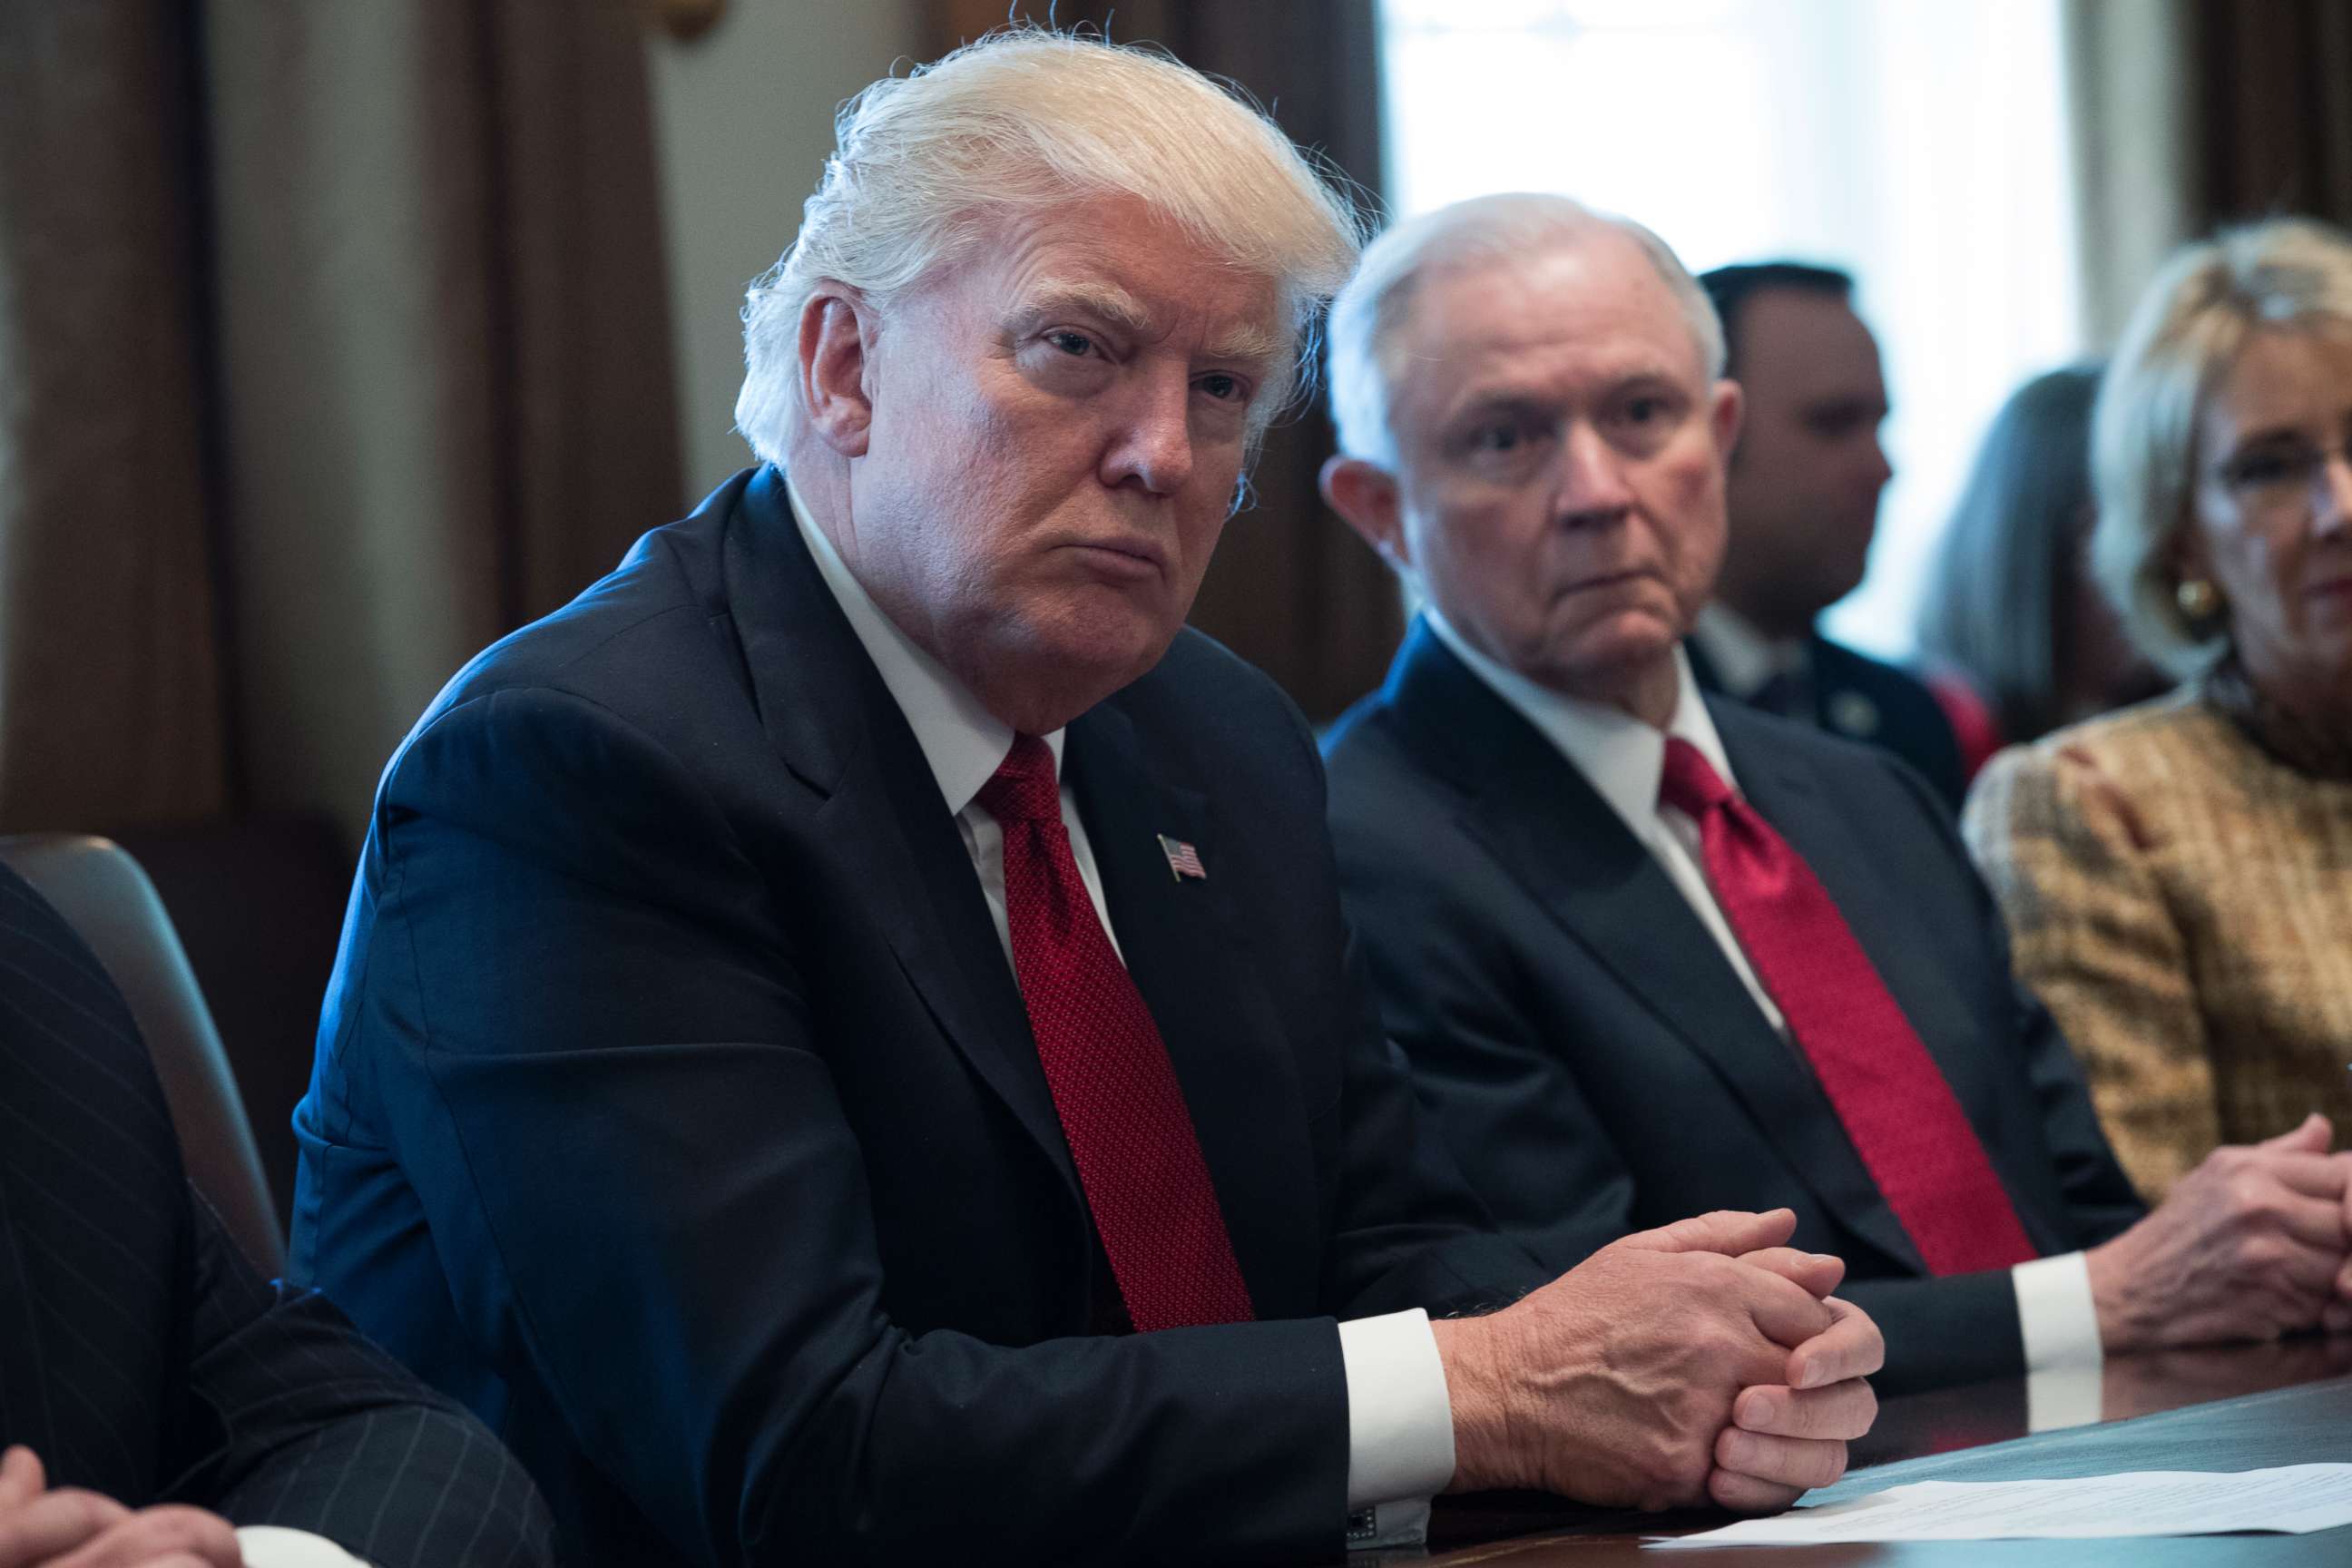 PHOTO: President Donald Trump and Attorney General Jeff Sessions attend a panel discussion on opioid and drug abuse in the Roosevelt Room of the White House, March 29, 2017. 